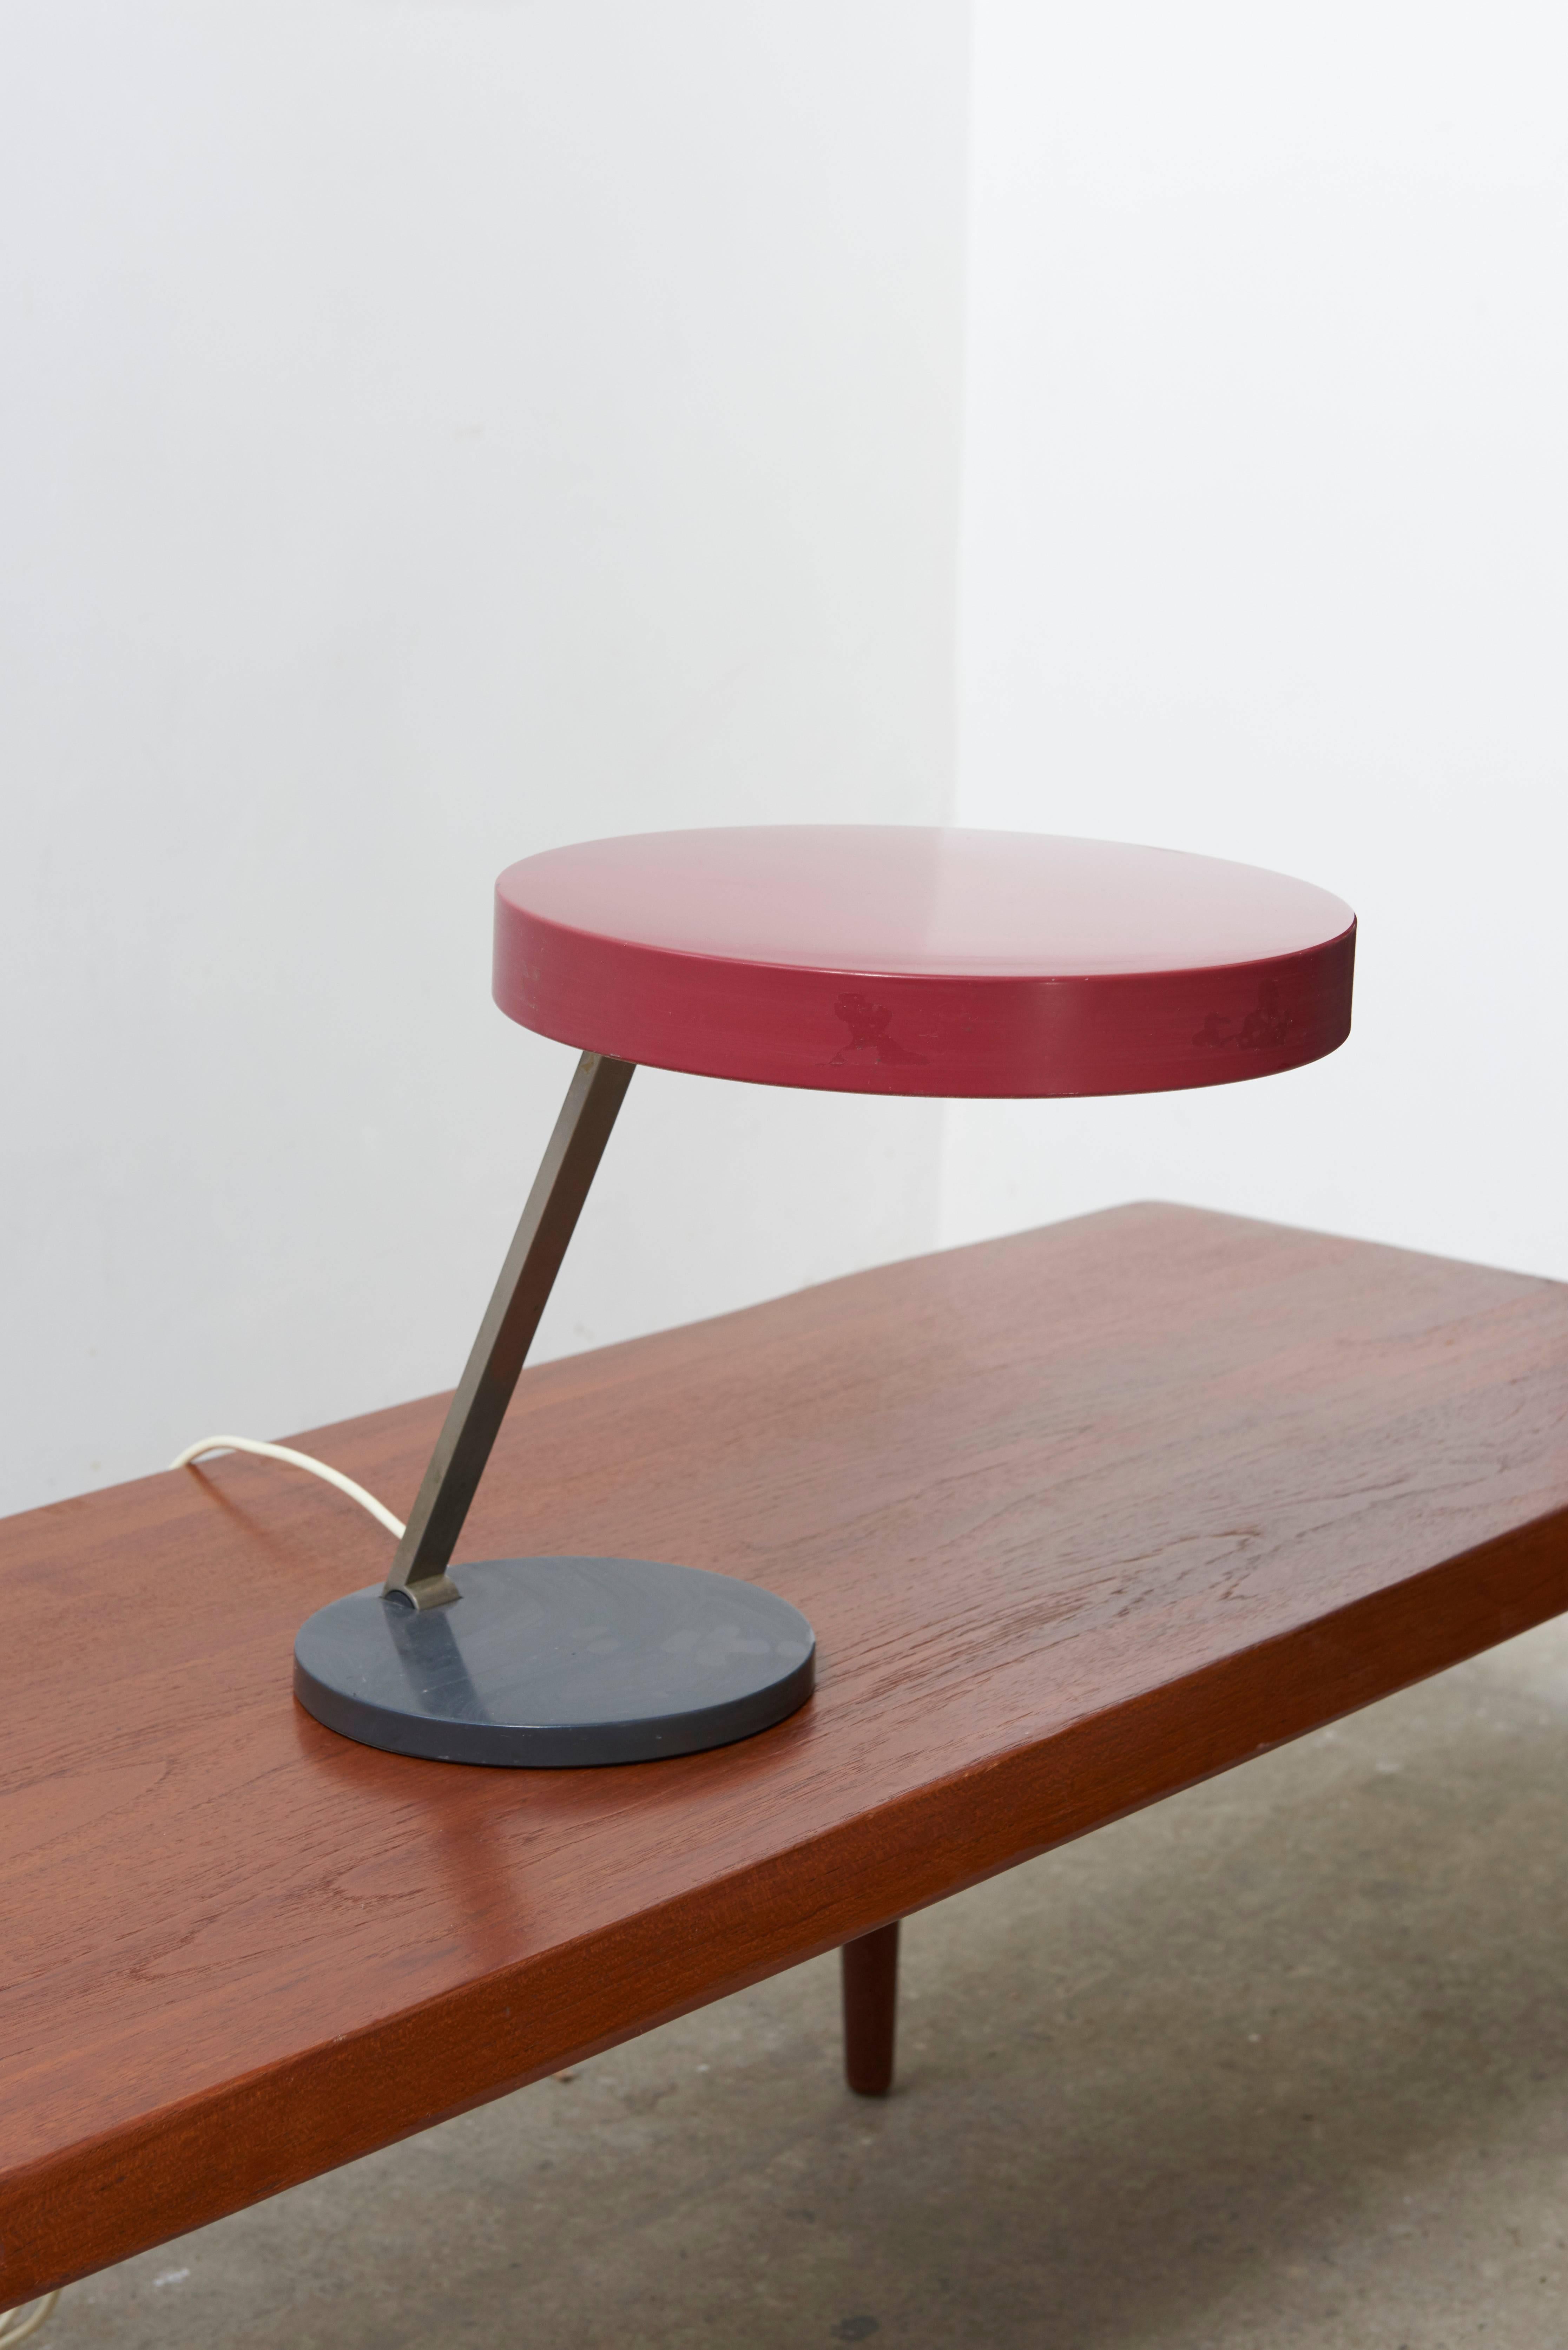 Bauhaus Christian Dell Kaiser Idell Adjustable Desk Lamp In Good Condition For Sale In Antwerp, BE